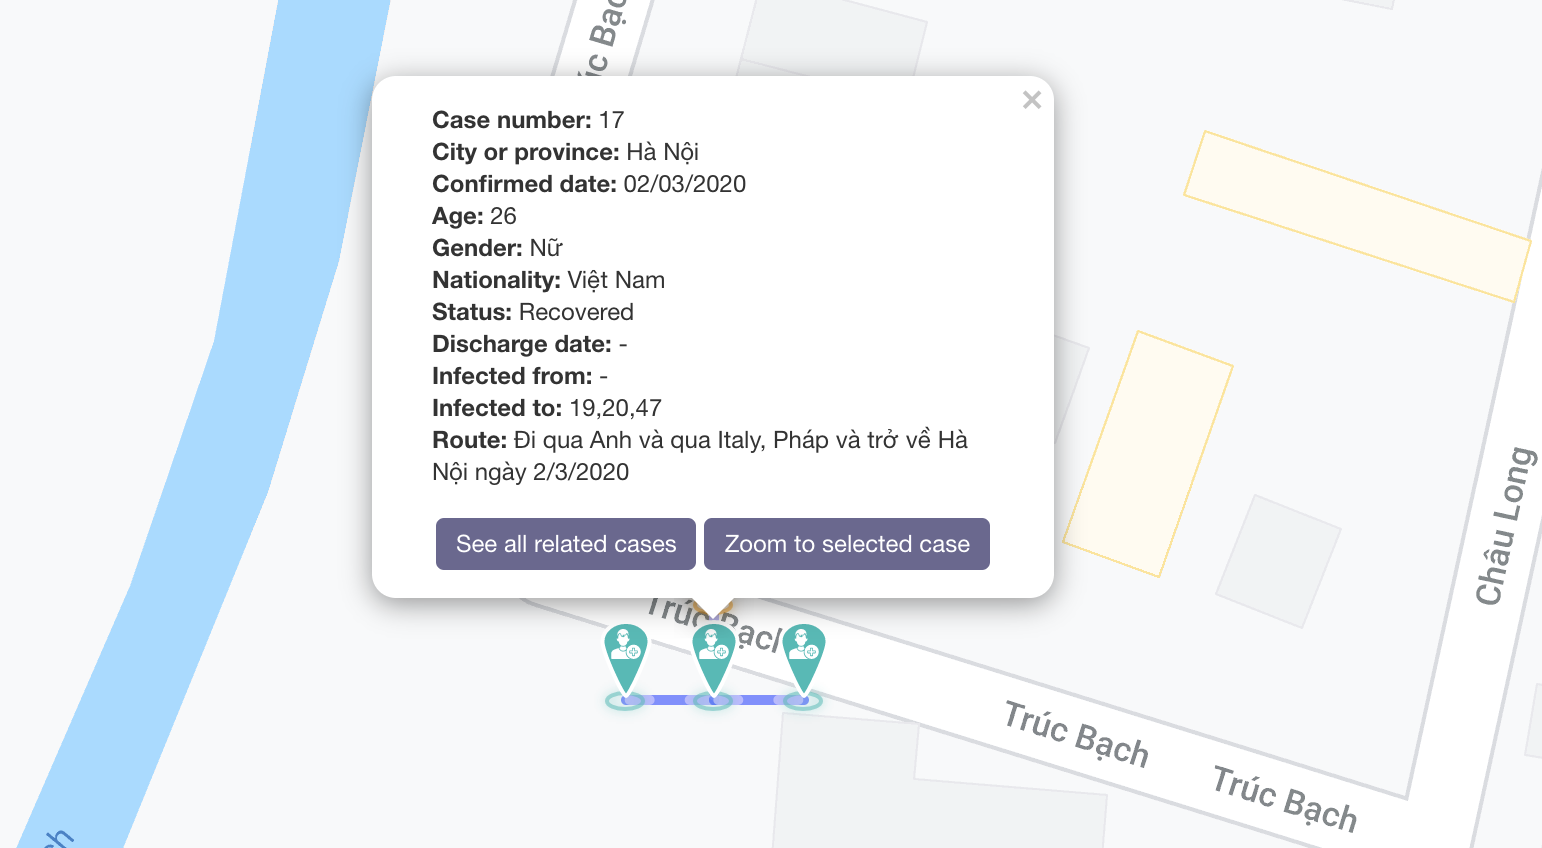 The vietnamcovid19.info live map allows users to look up information on a confirmed patient, including how they are linked to other cases.